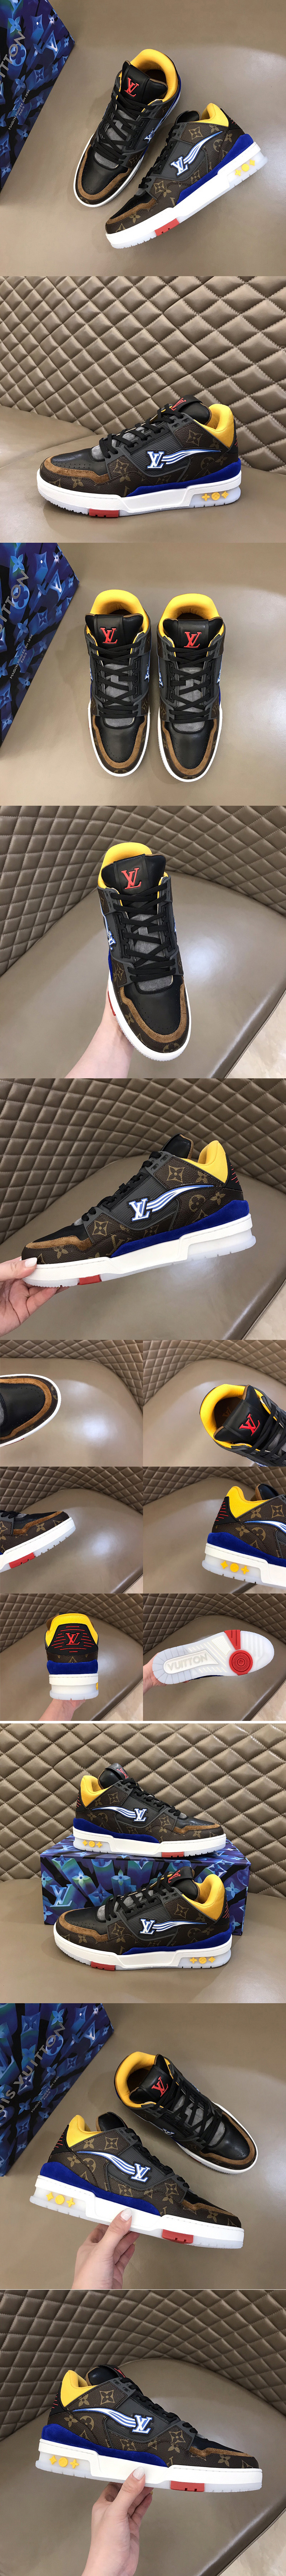 Replica Louis Vuitton 1A8AAS LV Trainer sneaker in Monogram canvas, mesh and suede calf leather